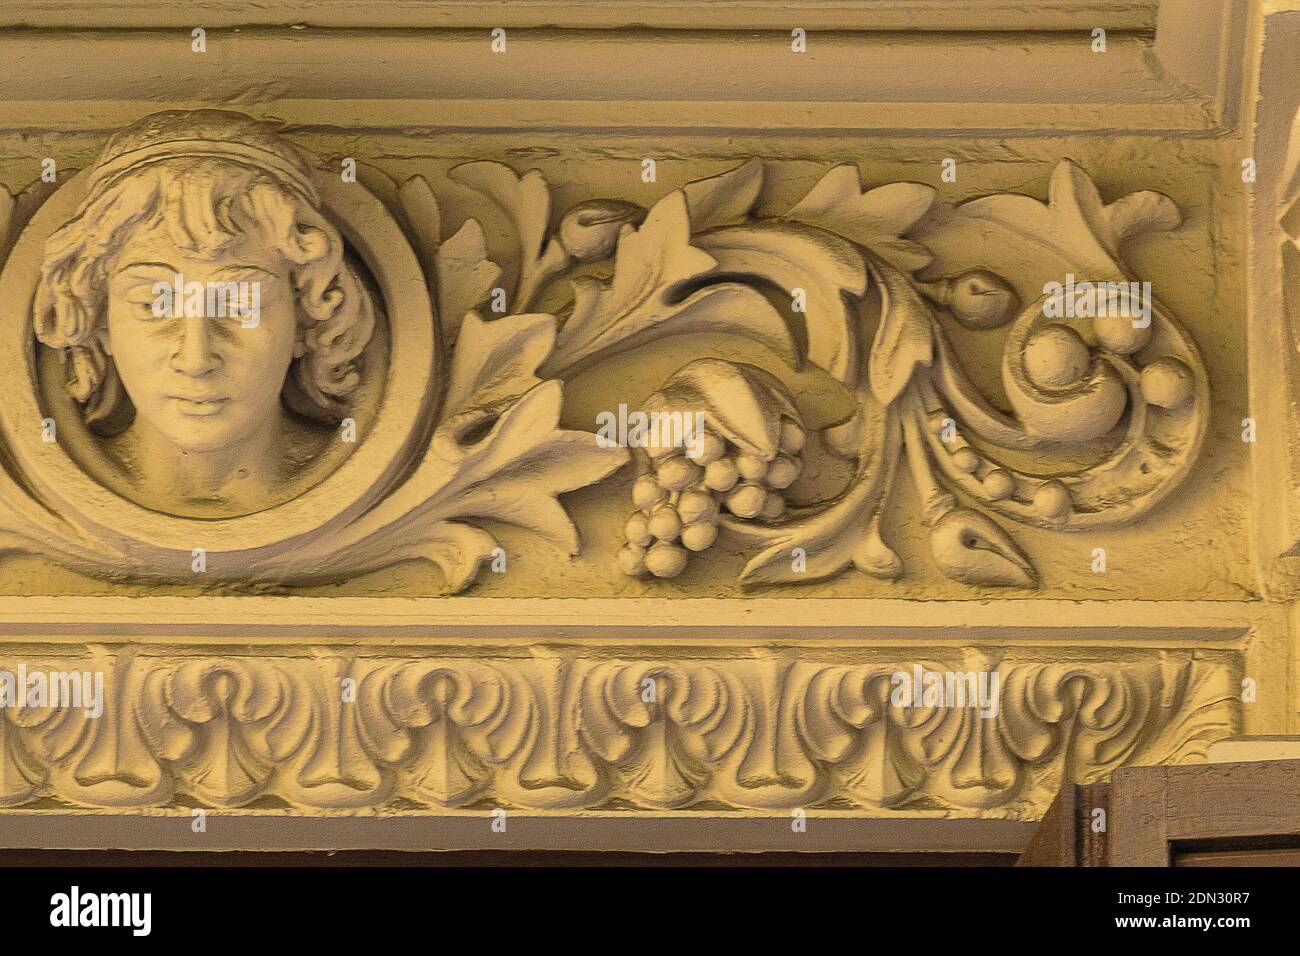 Elements of architectural decoration of buildings, stucco patterns with  flowers and faces, gypsum ornaments and wall textures Stock Photo - Alamy